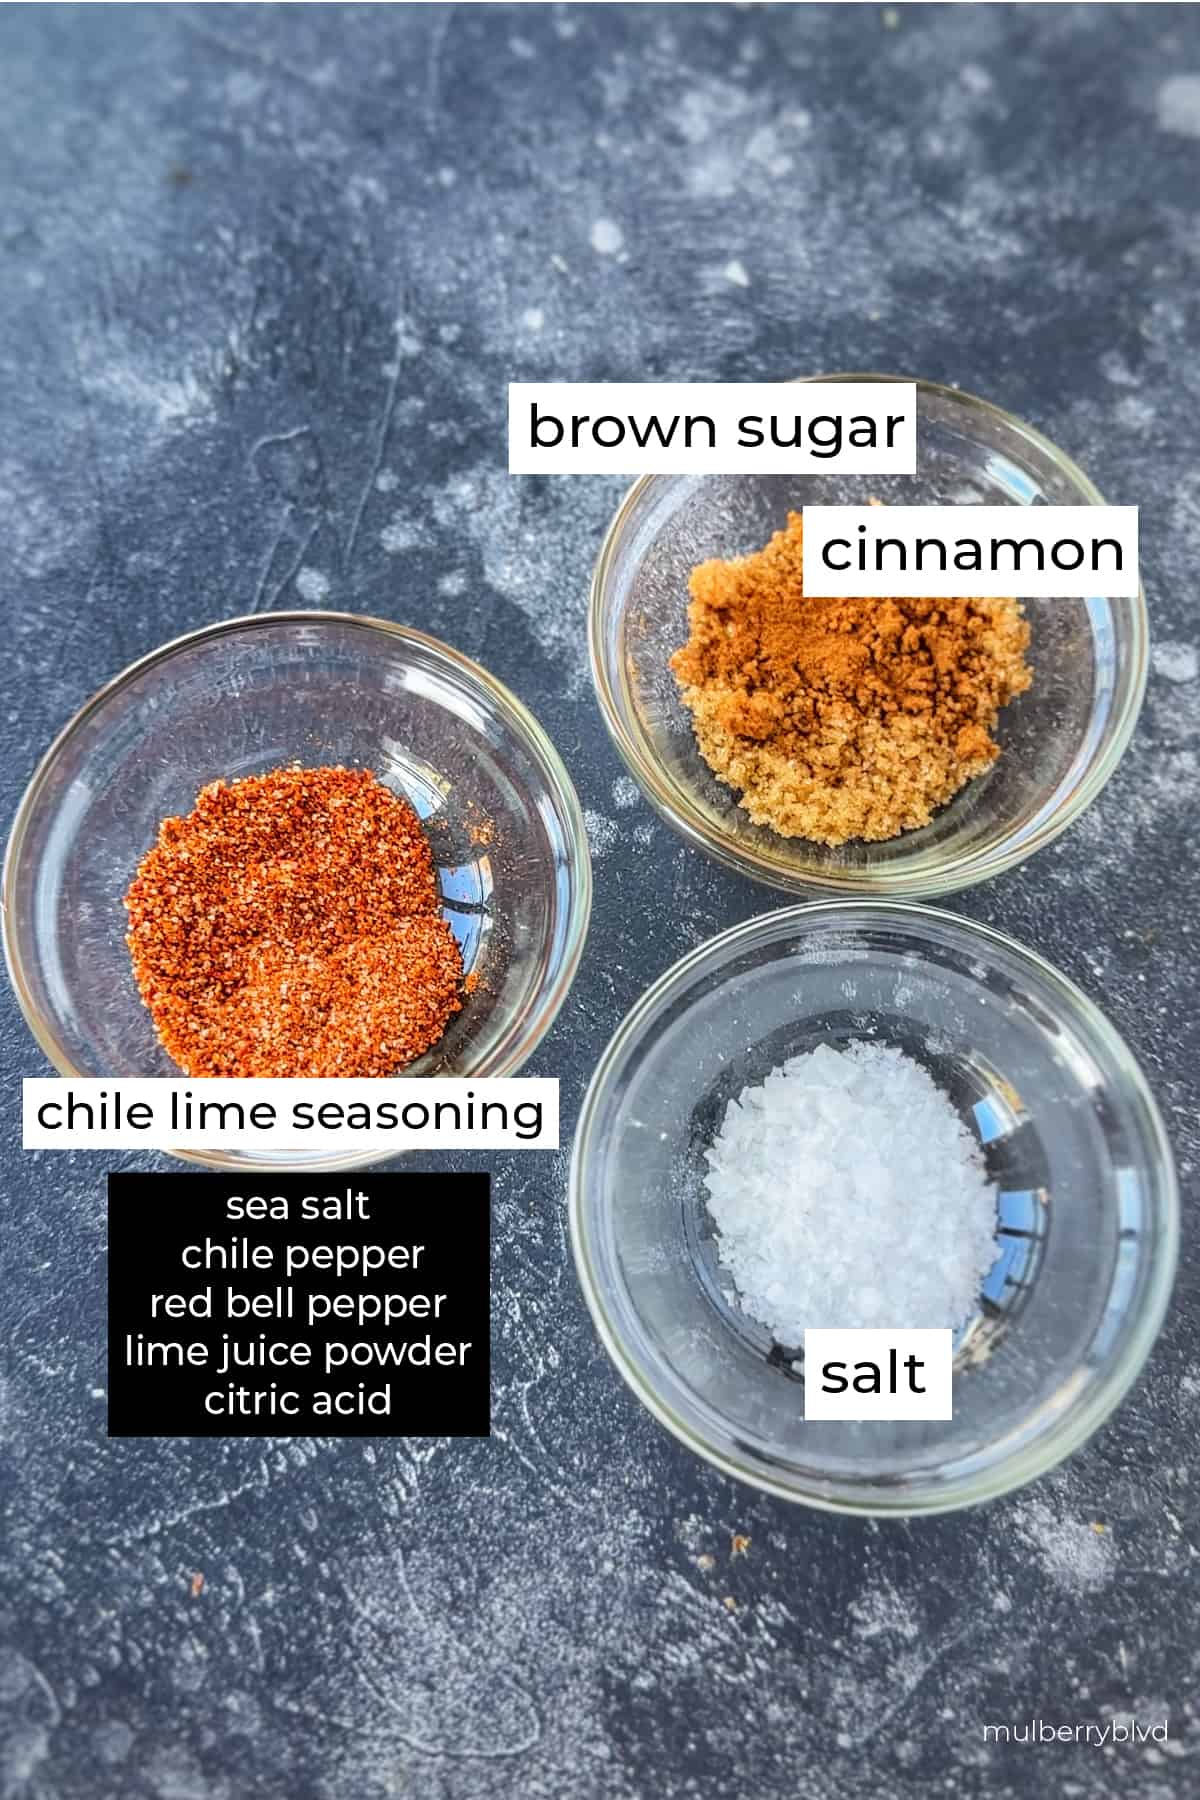 This is an image of the spices that are used to season the chicken. This includes salt, Chile lime seasoning, brown sugar and cinnamon.